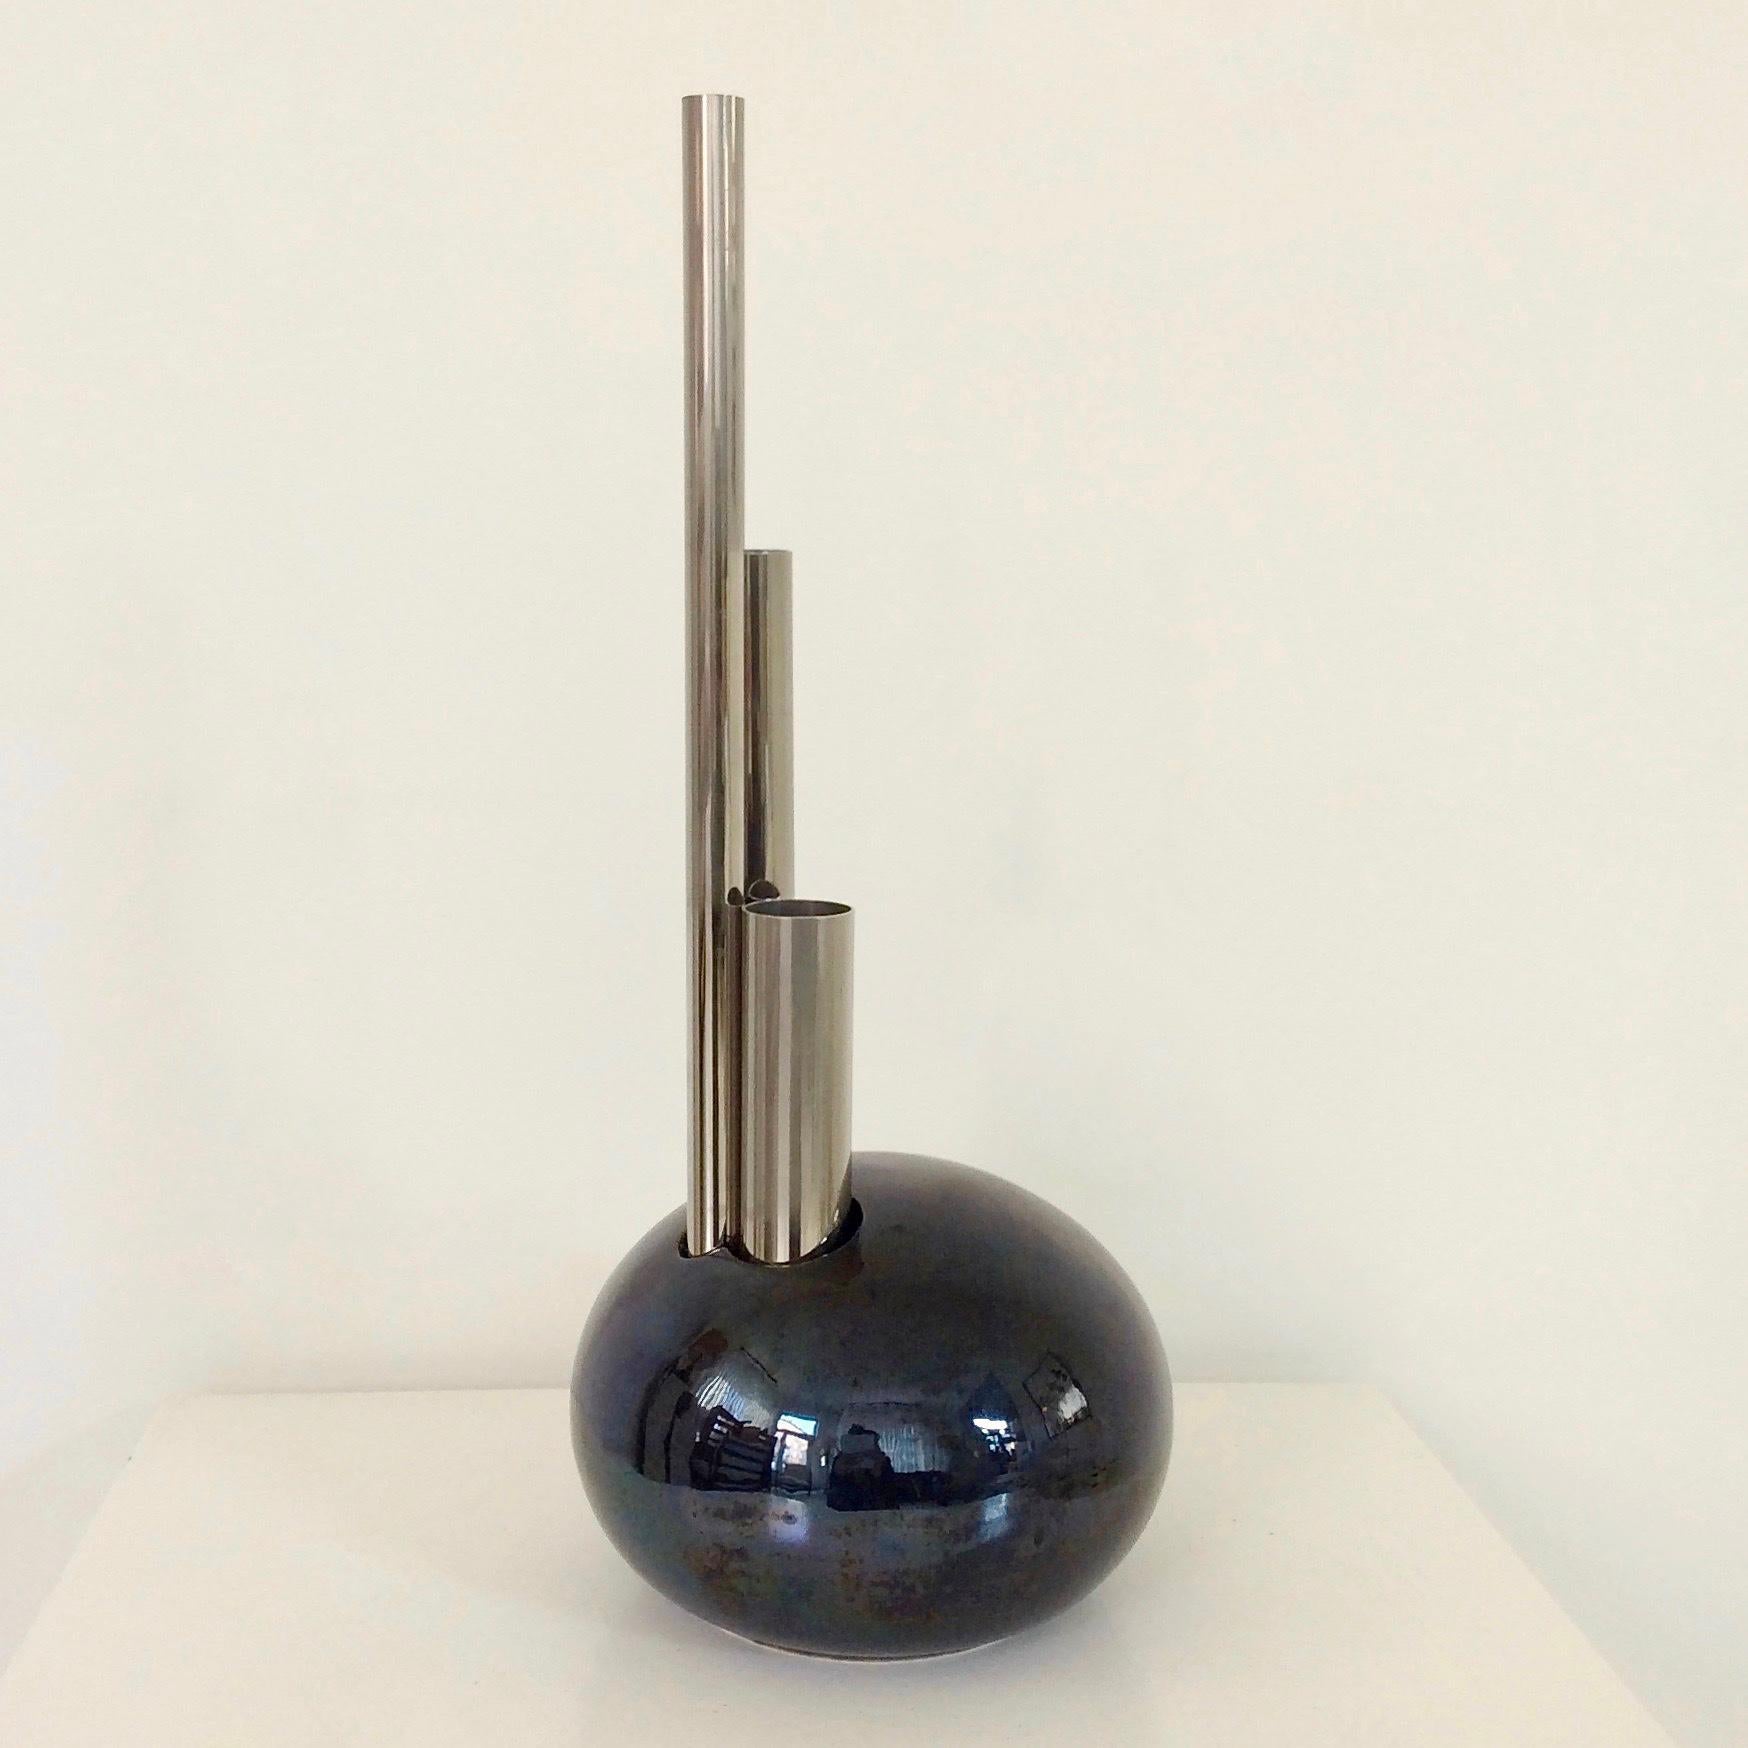 Nice decorative post-modern vase, circa 1980, Italy.
Round black glazed ceramic, three nickeled metal tubes.
Dimensions: 43 cm H, 18 cm diameter.
Good original condition.
All purchases are covered by our Buyer Protection Guarantee.
This item can be